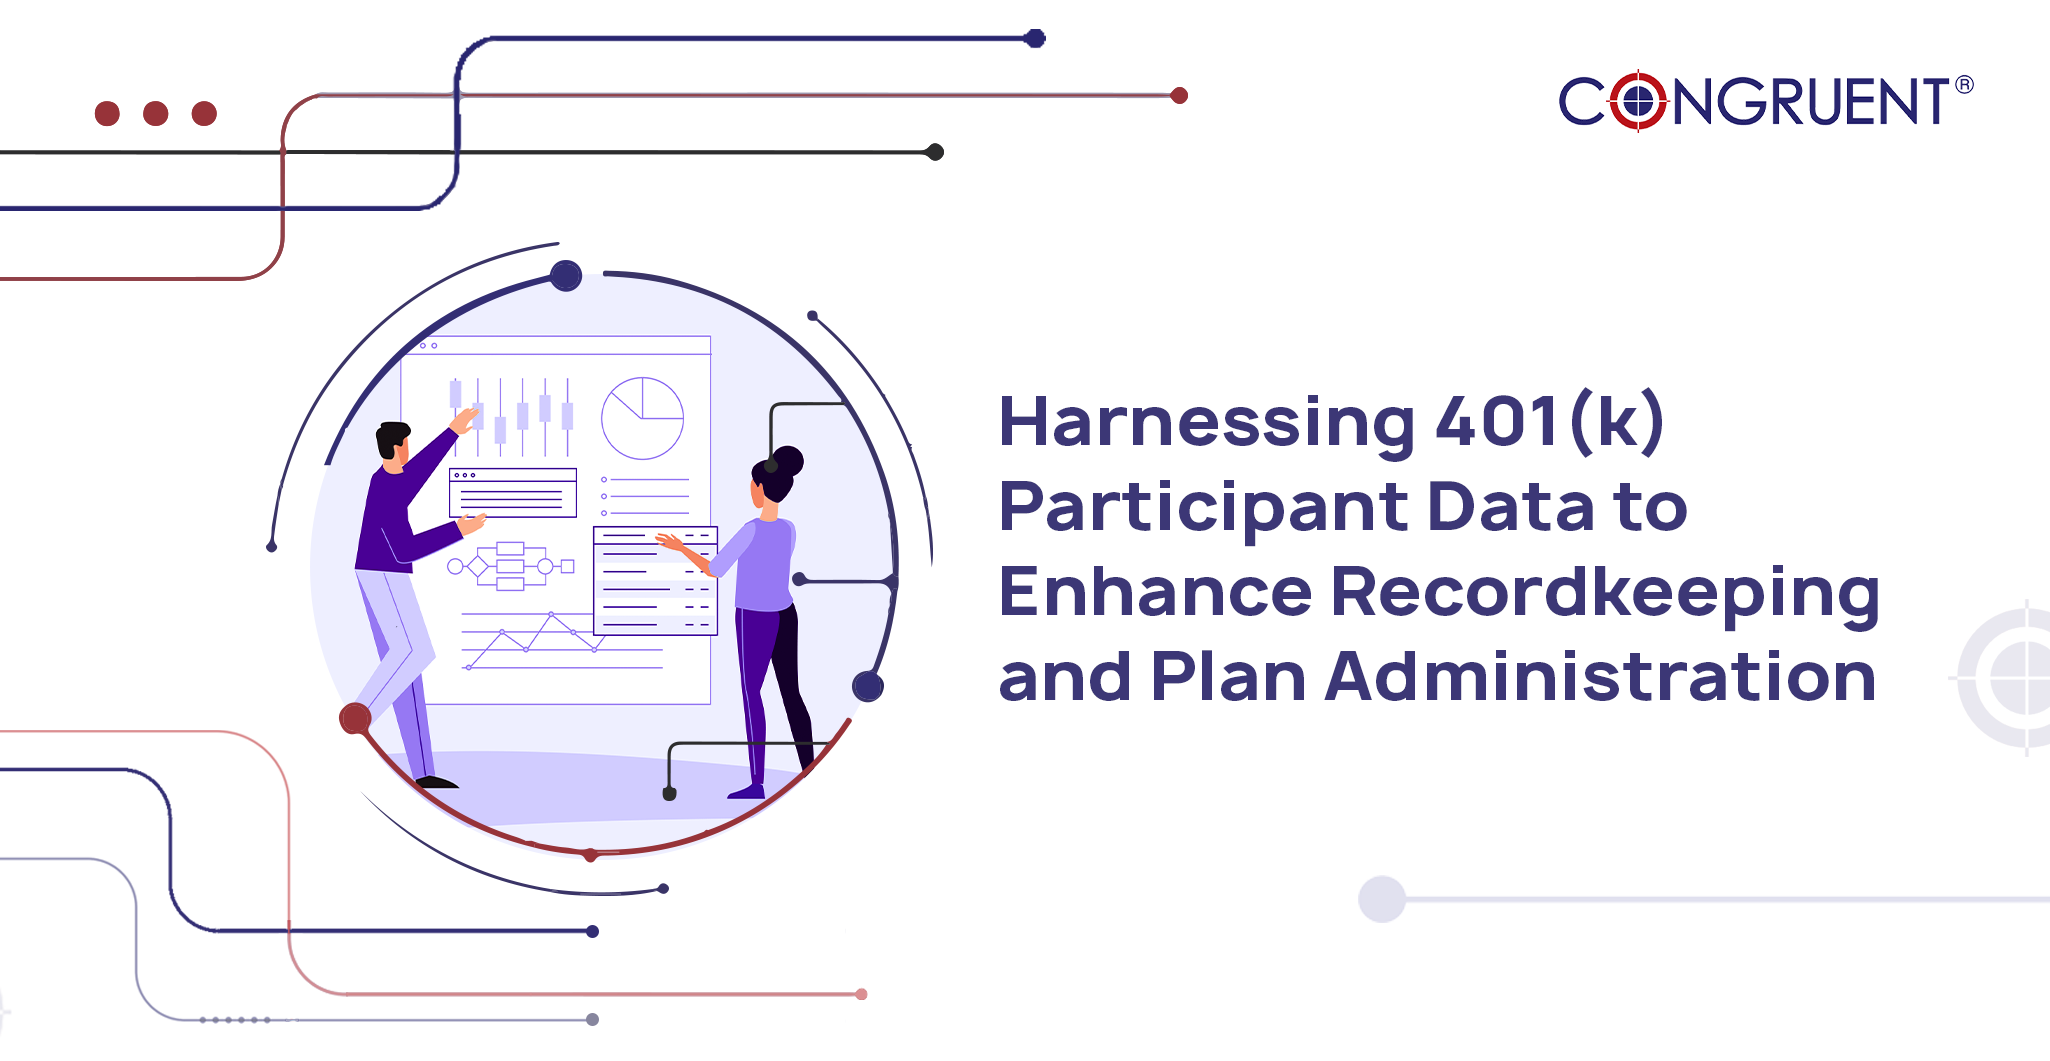 Harnessing 401(k) Participant Data to Enhance Recordkeeping and Plan Administration